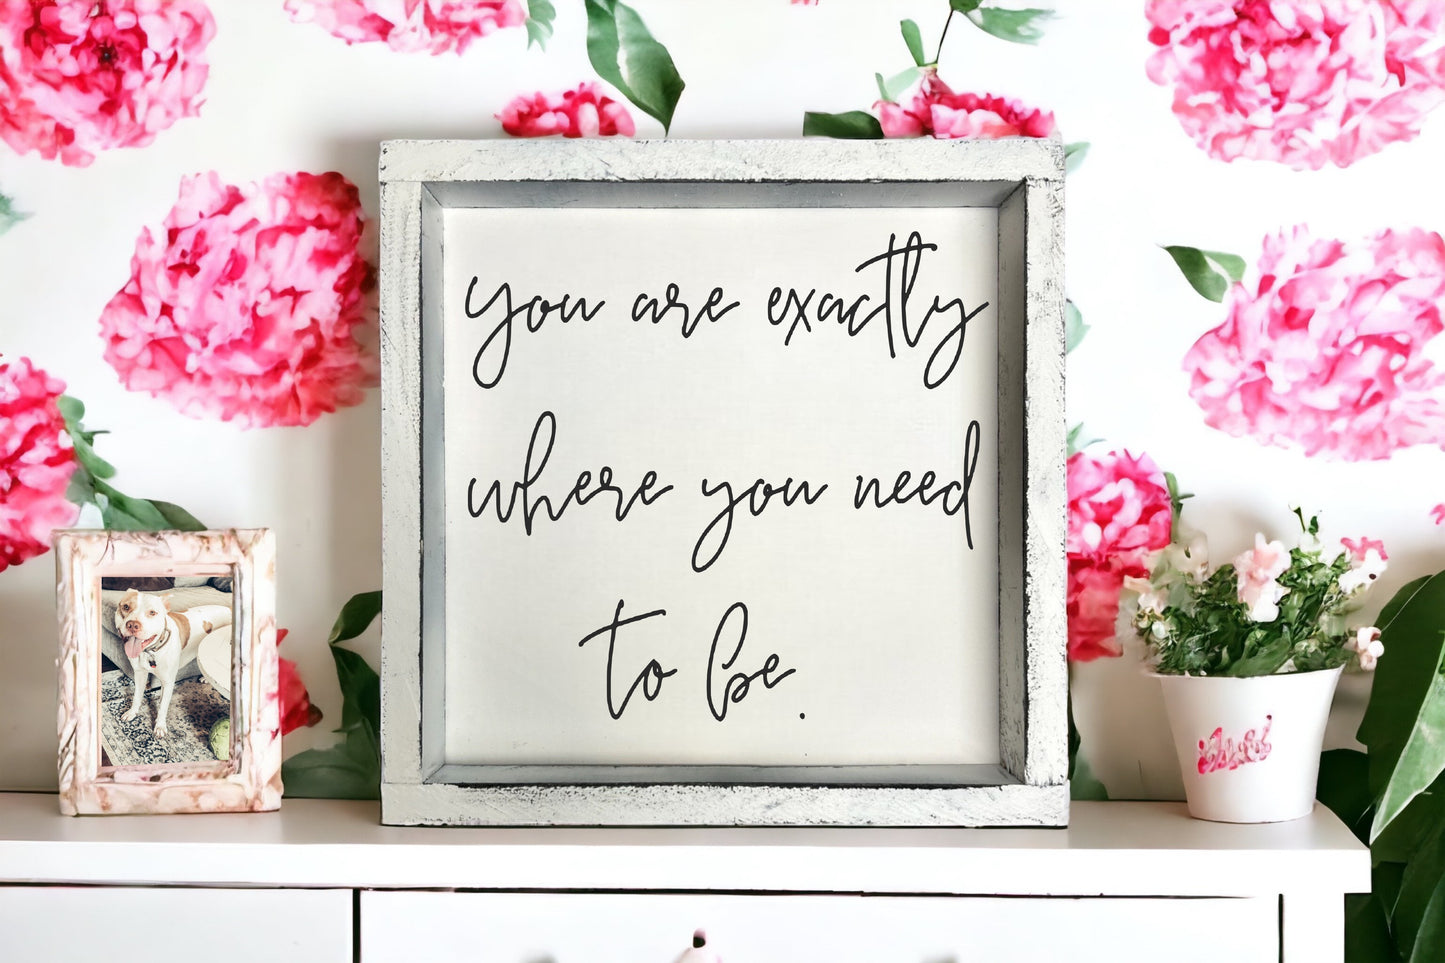 You are exactly where you need to be